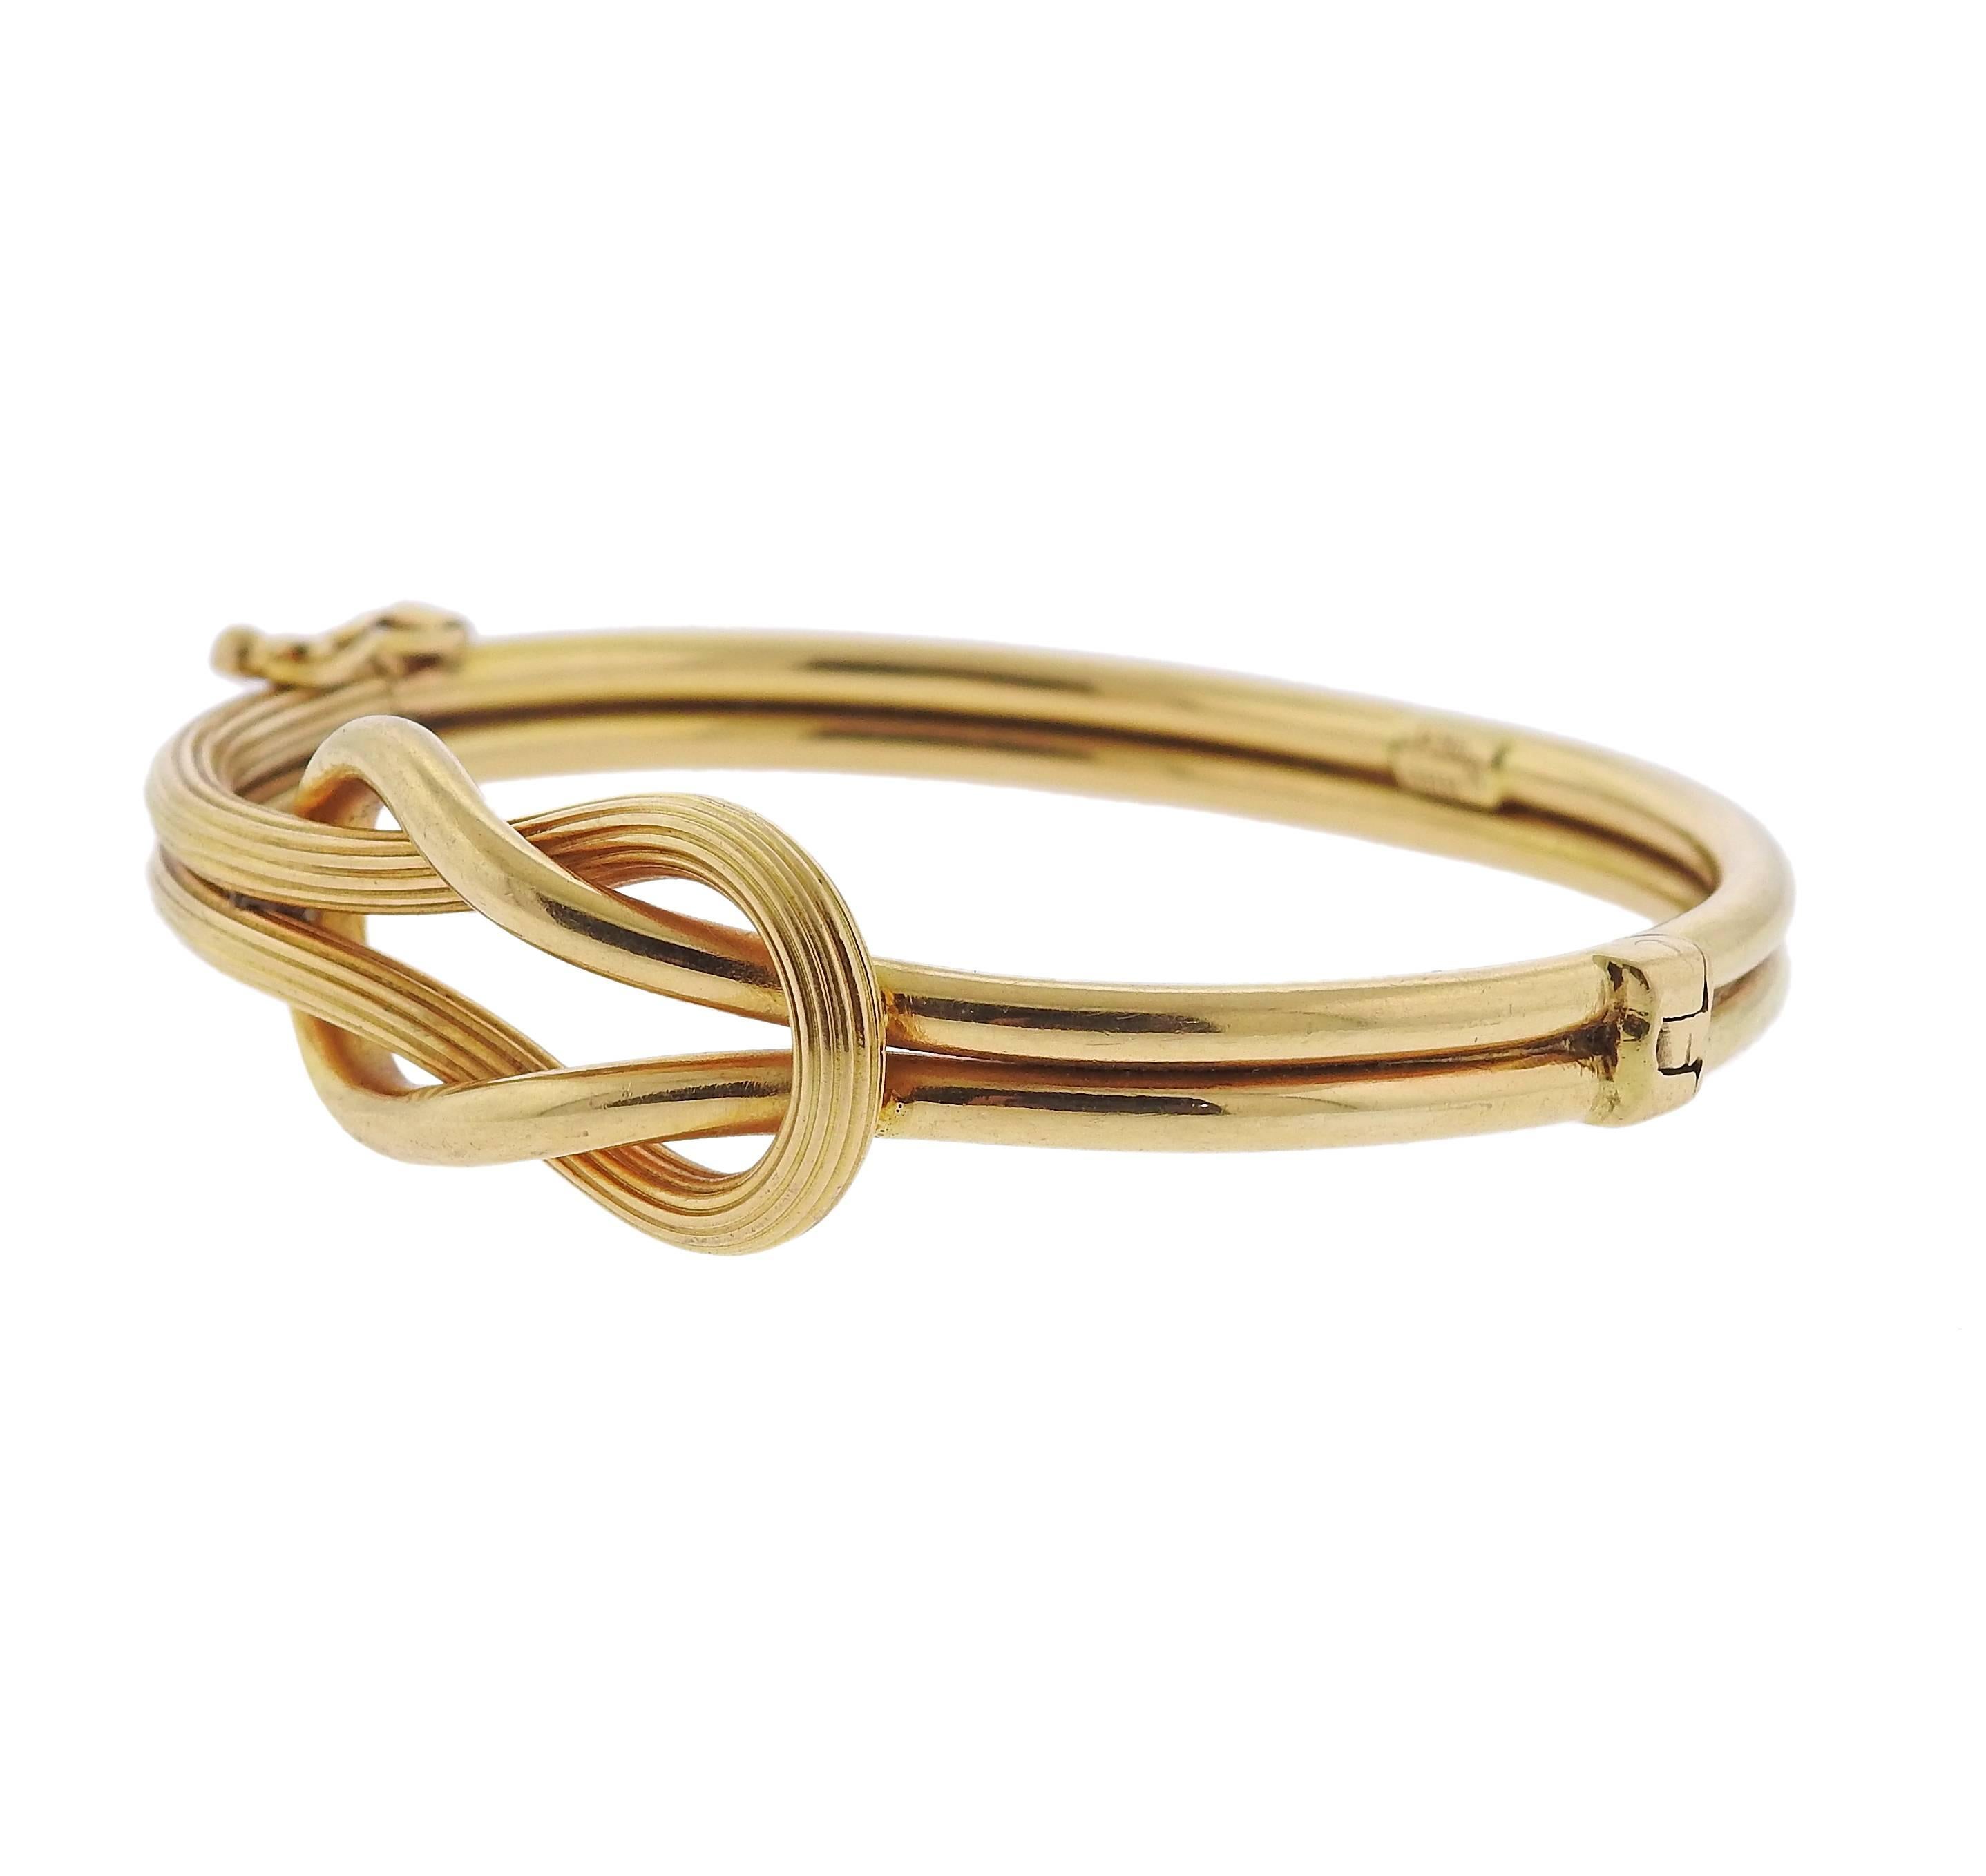 An 18k yellow gold bangle bracelet, crafted by Ilias Lalaounis, featuring tied knot design. Bracelet will fit approx. 7 1/2" wrist, knot is 16mm x 31mm. Marked: Greece, 750, Maker's mark . Weight - 19.2 grams 